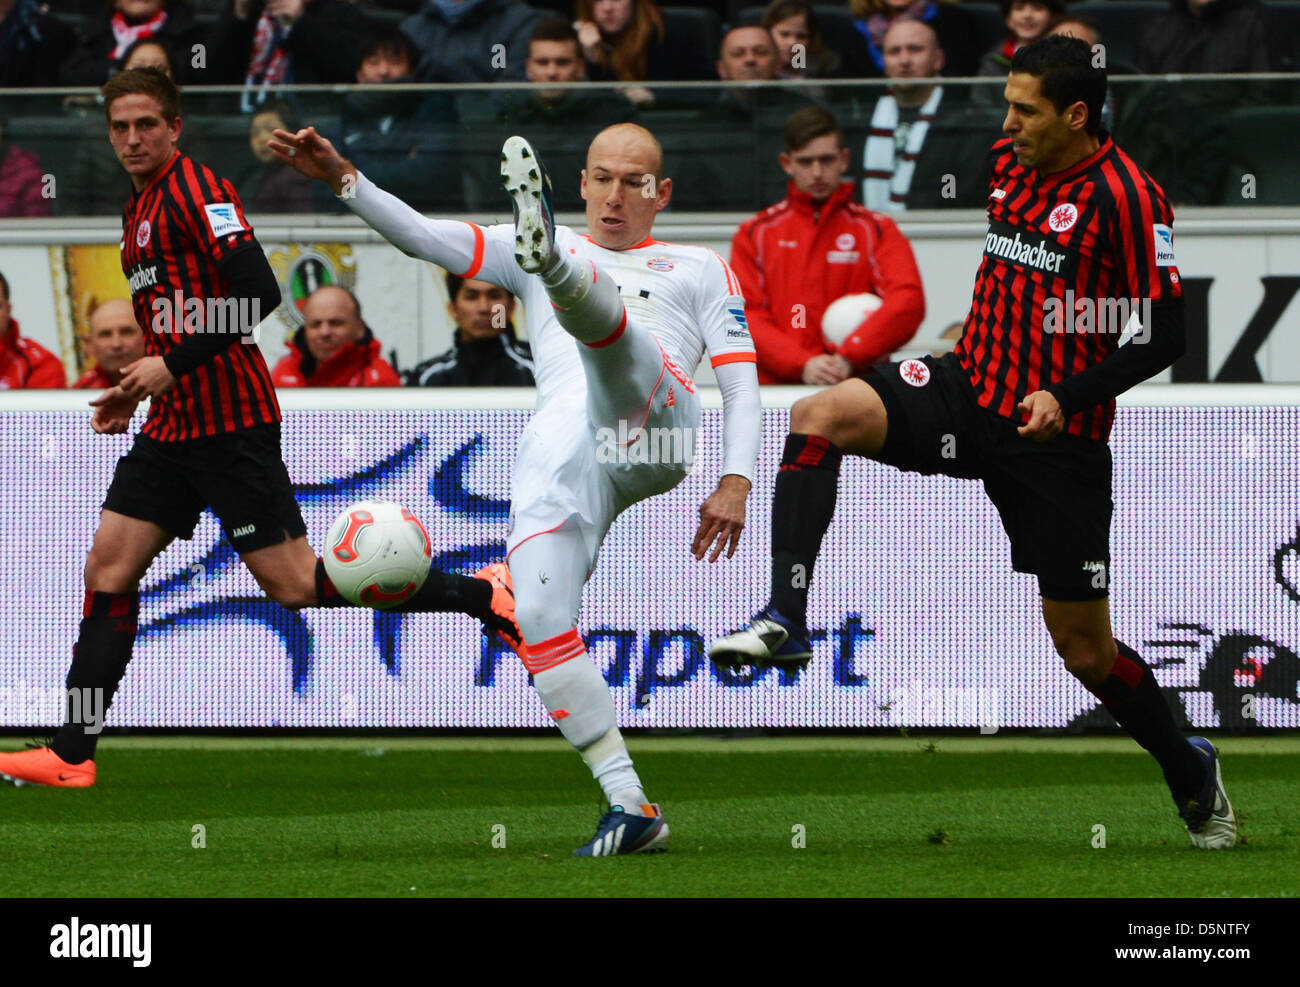 Frankfurt's Karim Matmour (R) and Bastian Oczipka vie for the ball with Munich's Arjen Robben (C) during the Bundesliga soccer between Eintracht Frankfurt and Bayern Munich at Commerzbank Arena in Frankfurt Main, Germany, 06 April 2013. Photo: ARNE DEDERT  (ATTENTION: EMBARGO CONDITIONS! The DFL permits the further  utilisation of up to 15 pictures only (no sequntial pictures or video-similar series of pictures allowed) via the internet and online media during the match (including halftime), taken from inside the stadium and/or prior to the start of the match. The DFL permits the unrestricted  Stock Photo